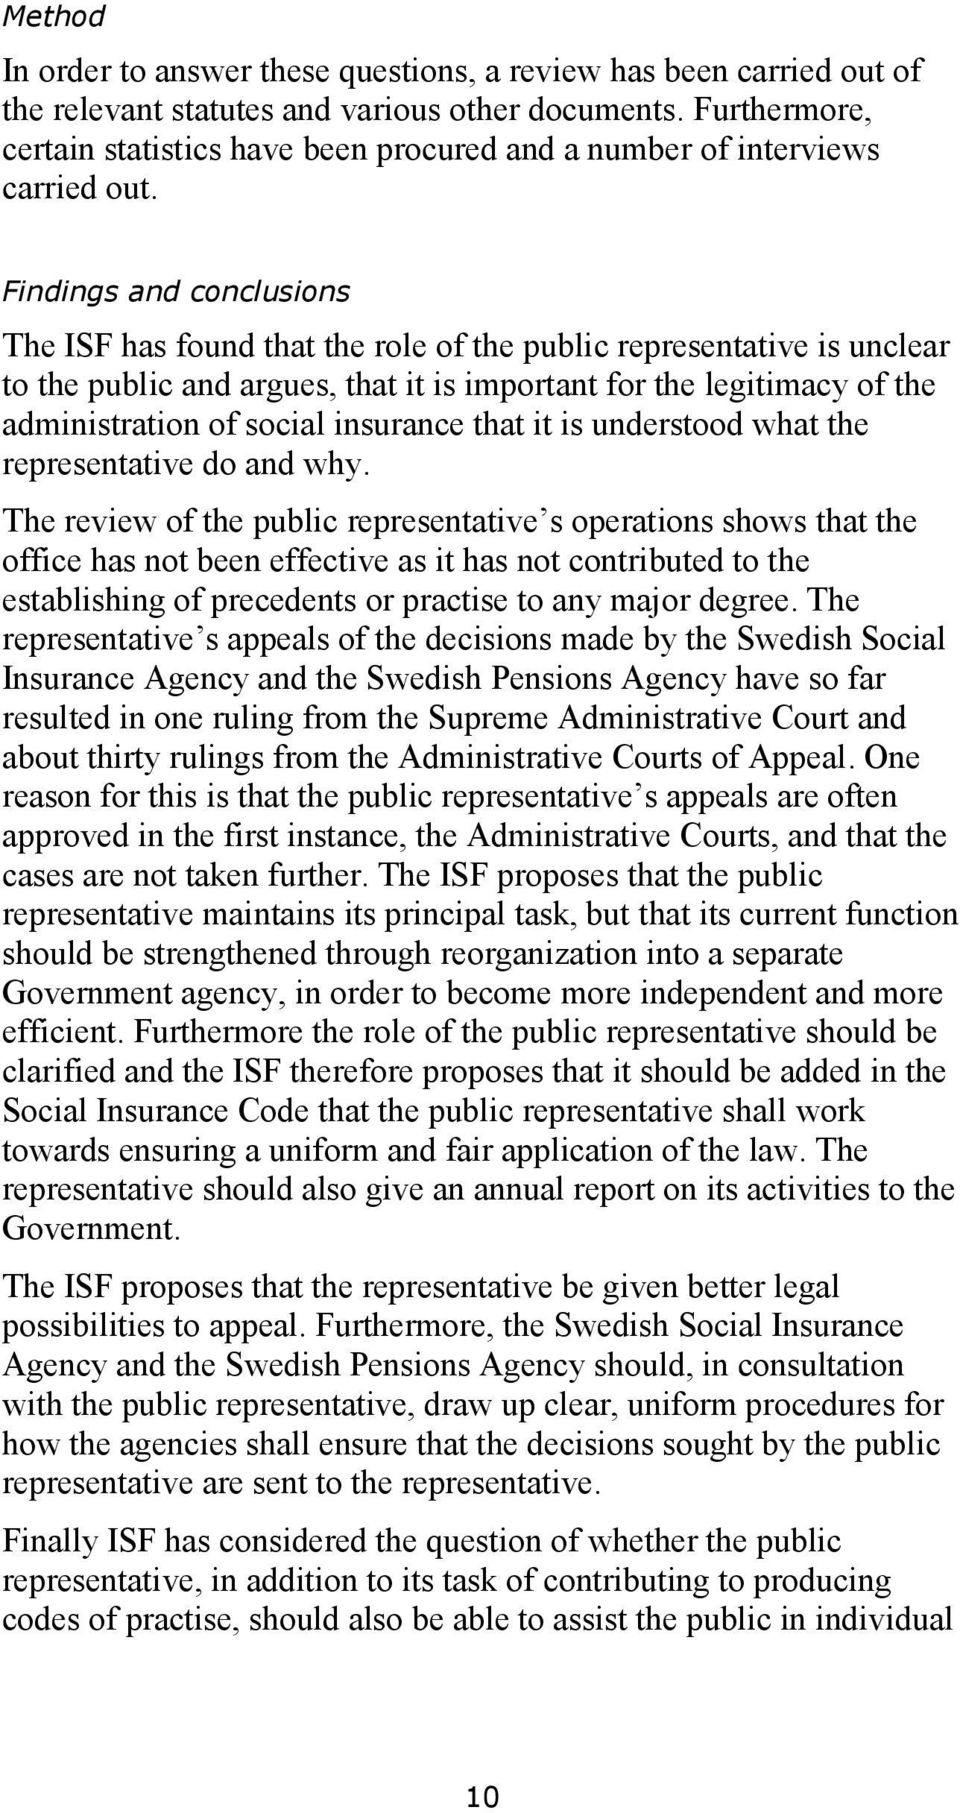 Findings and conclusions The ISF has found that the role of the public representative is unclear to the public and argues, that it is important for the legitimacy of the administration of social